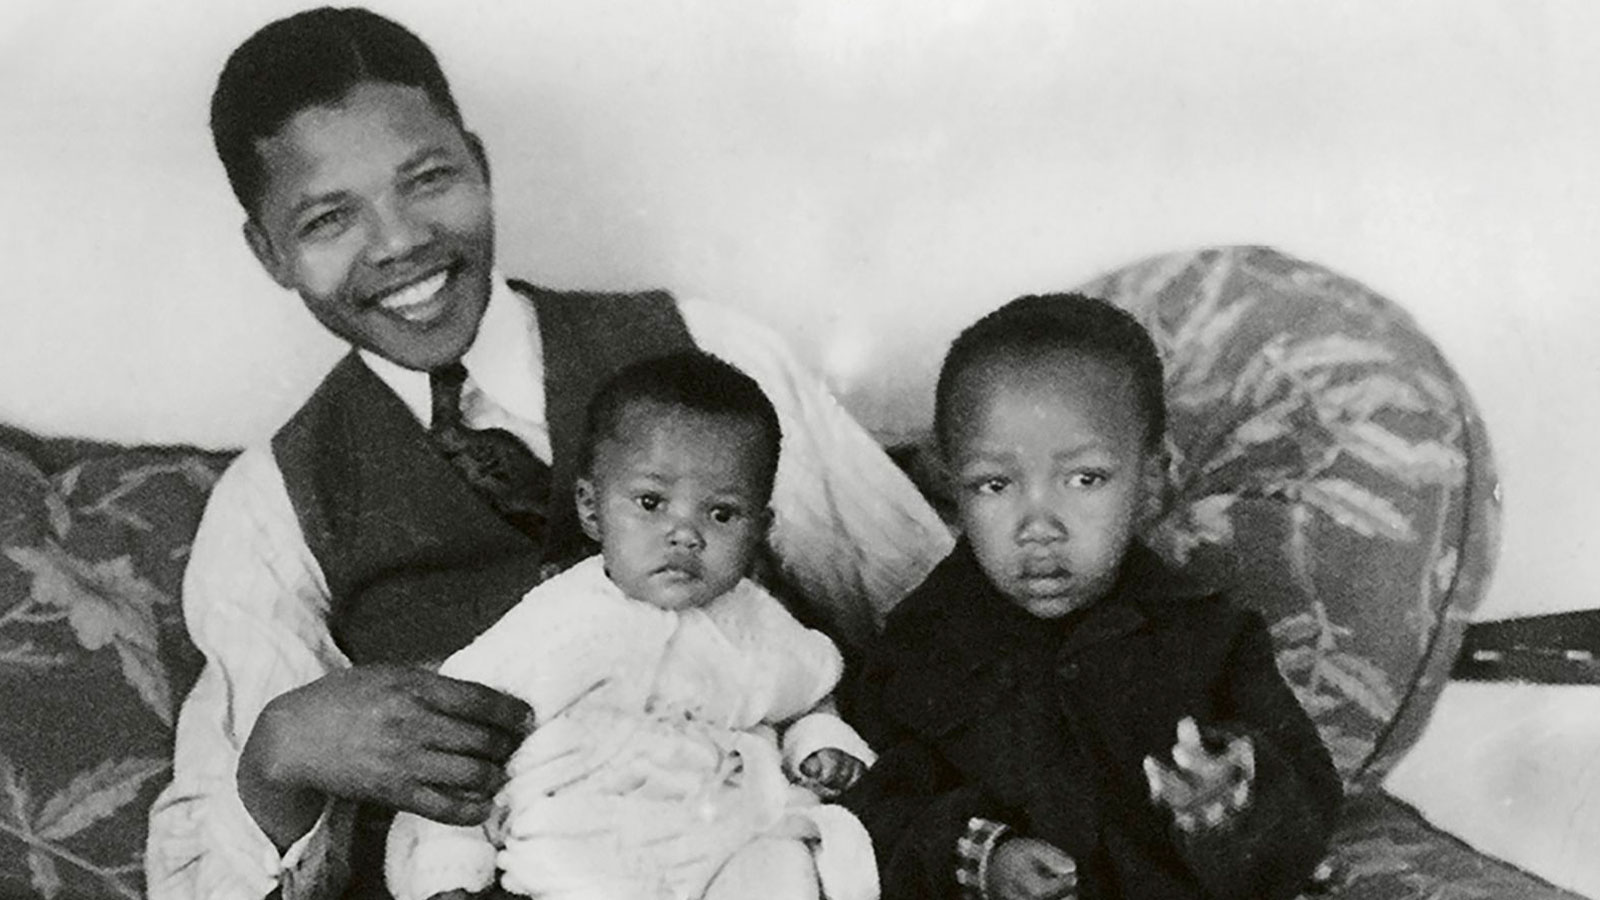 Nelson Mandela with first daughter Makaziwe and son Thembekile, photographed in 1948. Makaziwe died in infancy and Thembekile died in a car crash in 1969, while Nelson and wife Evelyn Mase's second son Makgatho died in 2005. Their youngest sibling Pumla Makaziwe Mandela was named after her late older sister.